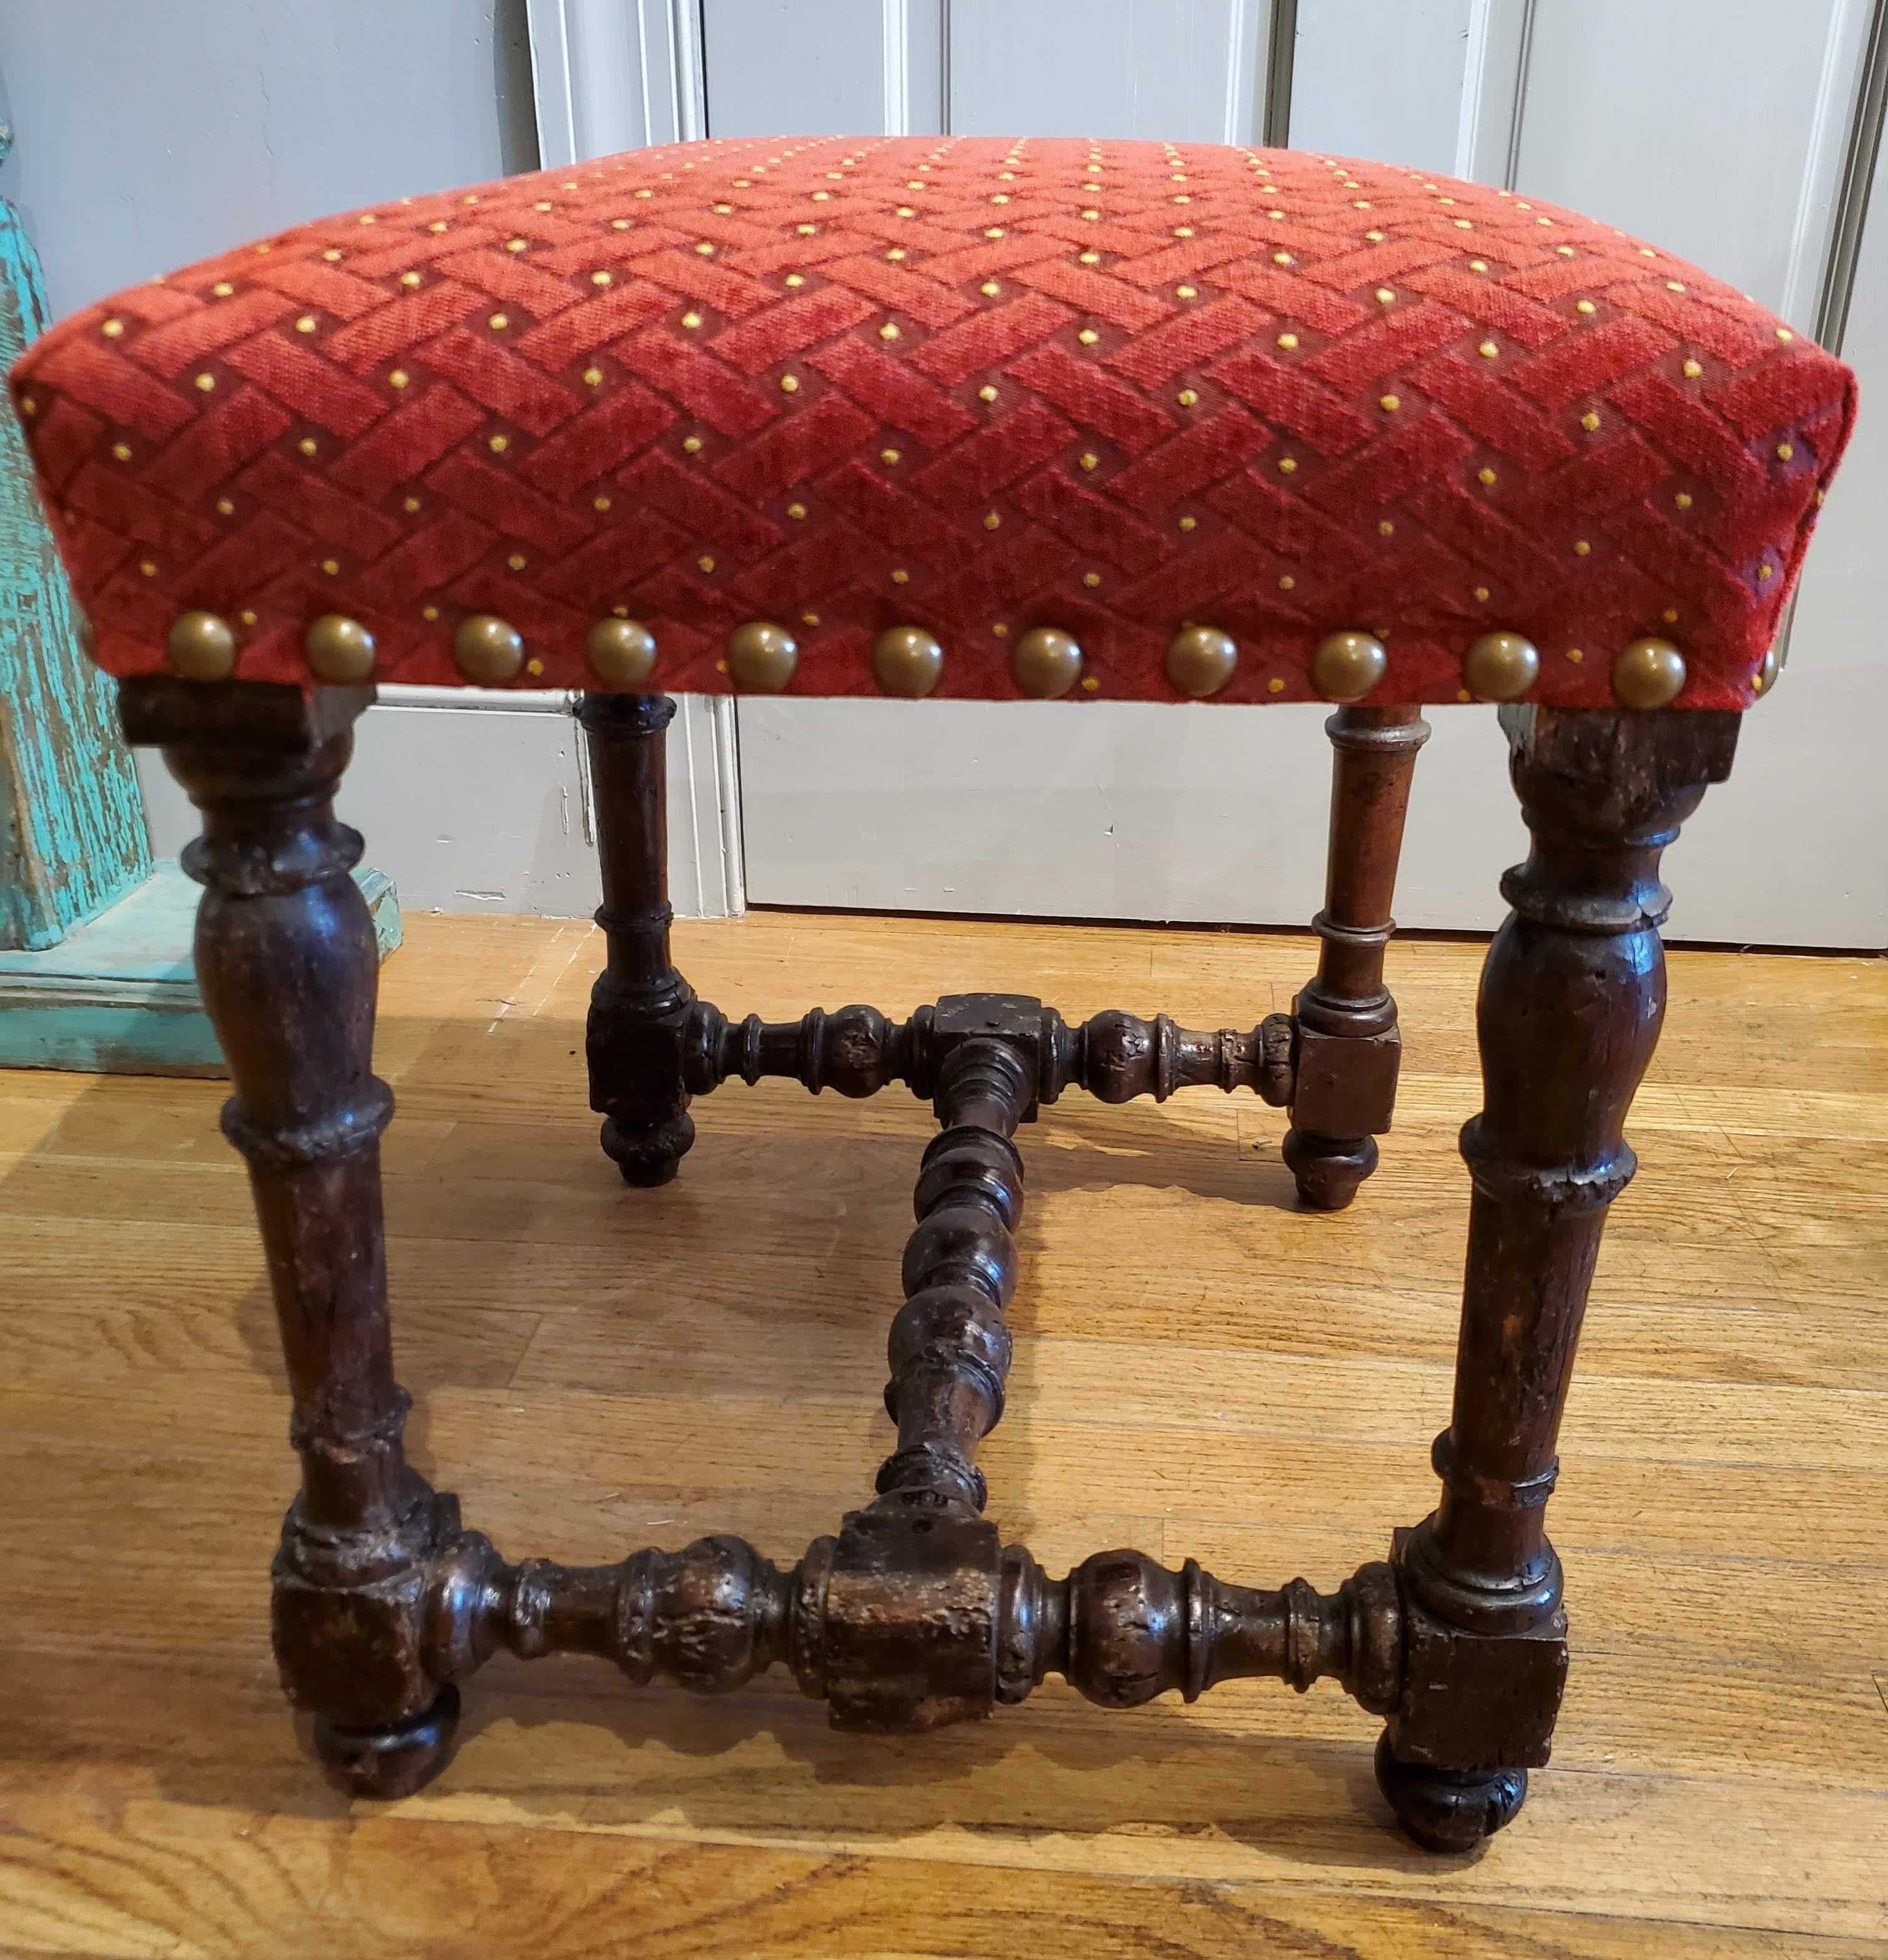 Louis XIV Small 17th Century Stool Upholstered in Red Chenille Fabric and Brass Nailheads